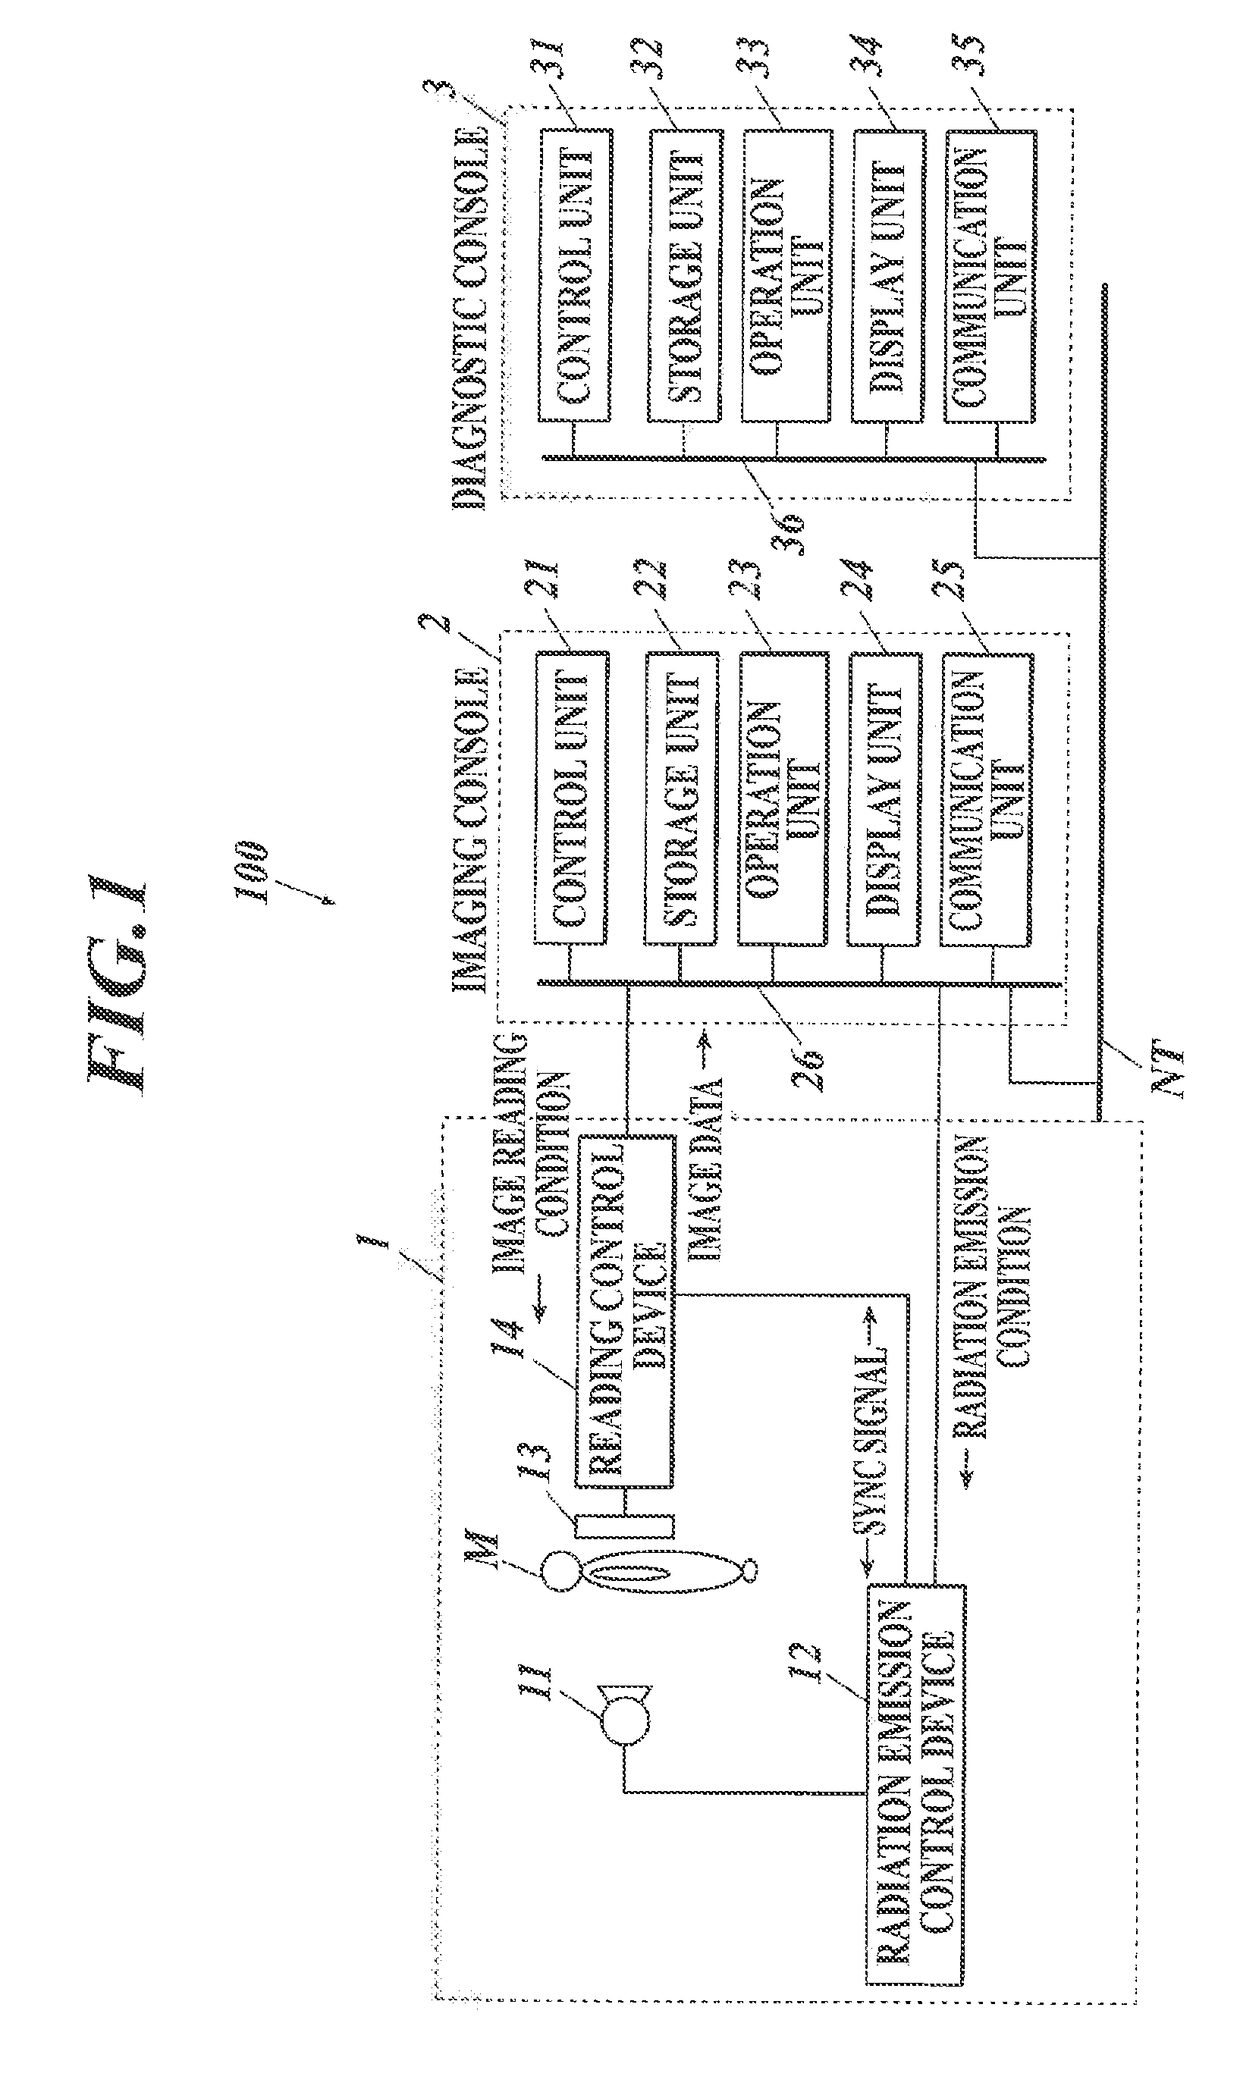 Dynamic analysis system and analysis device